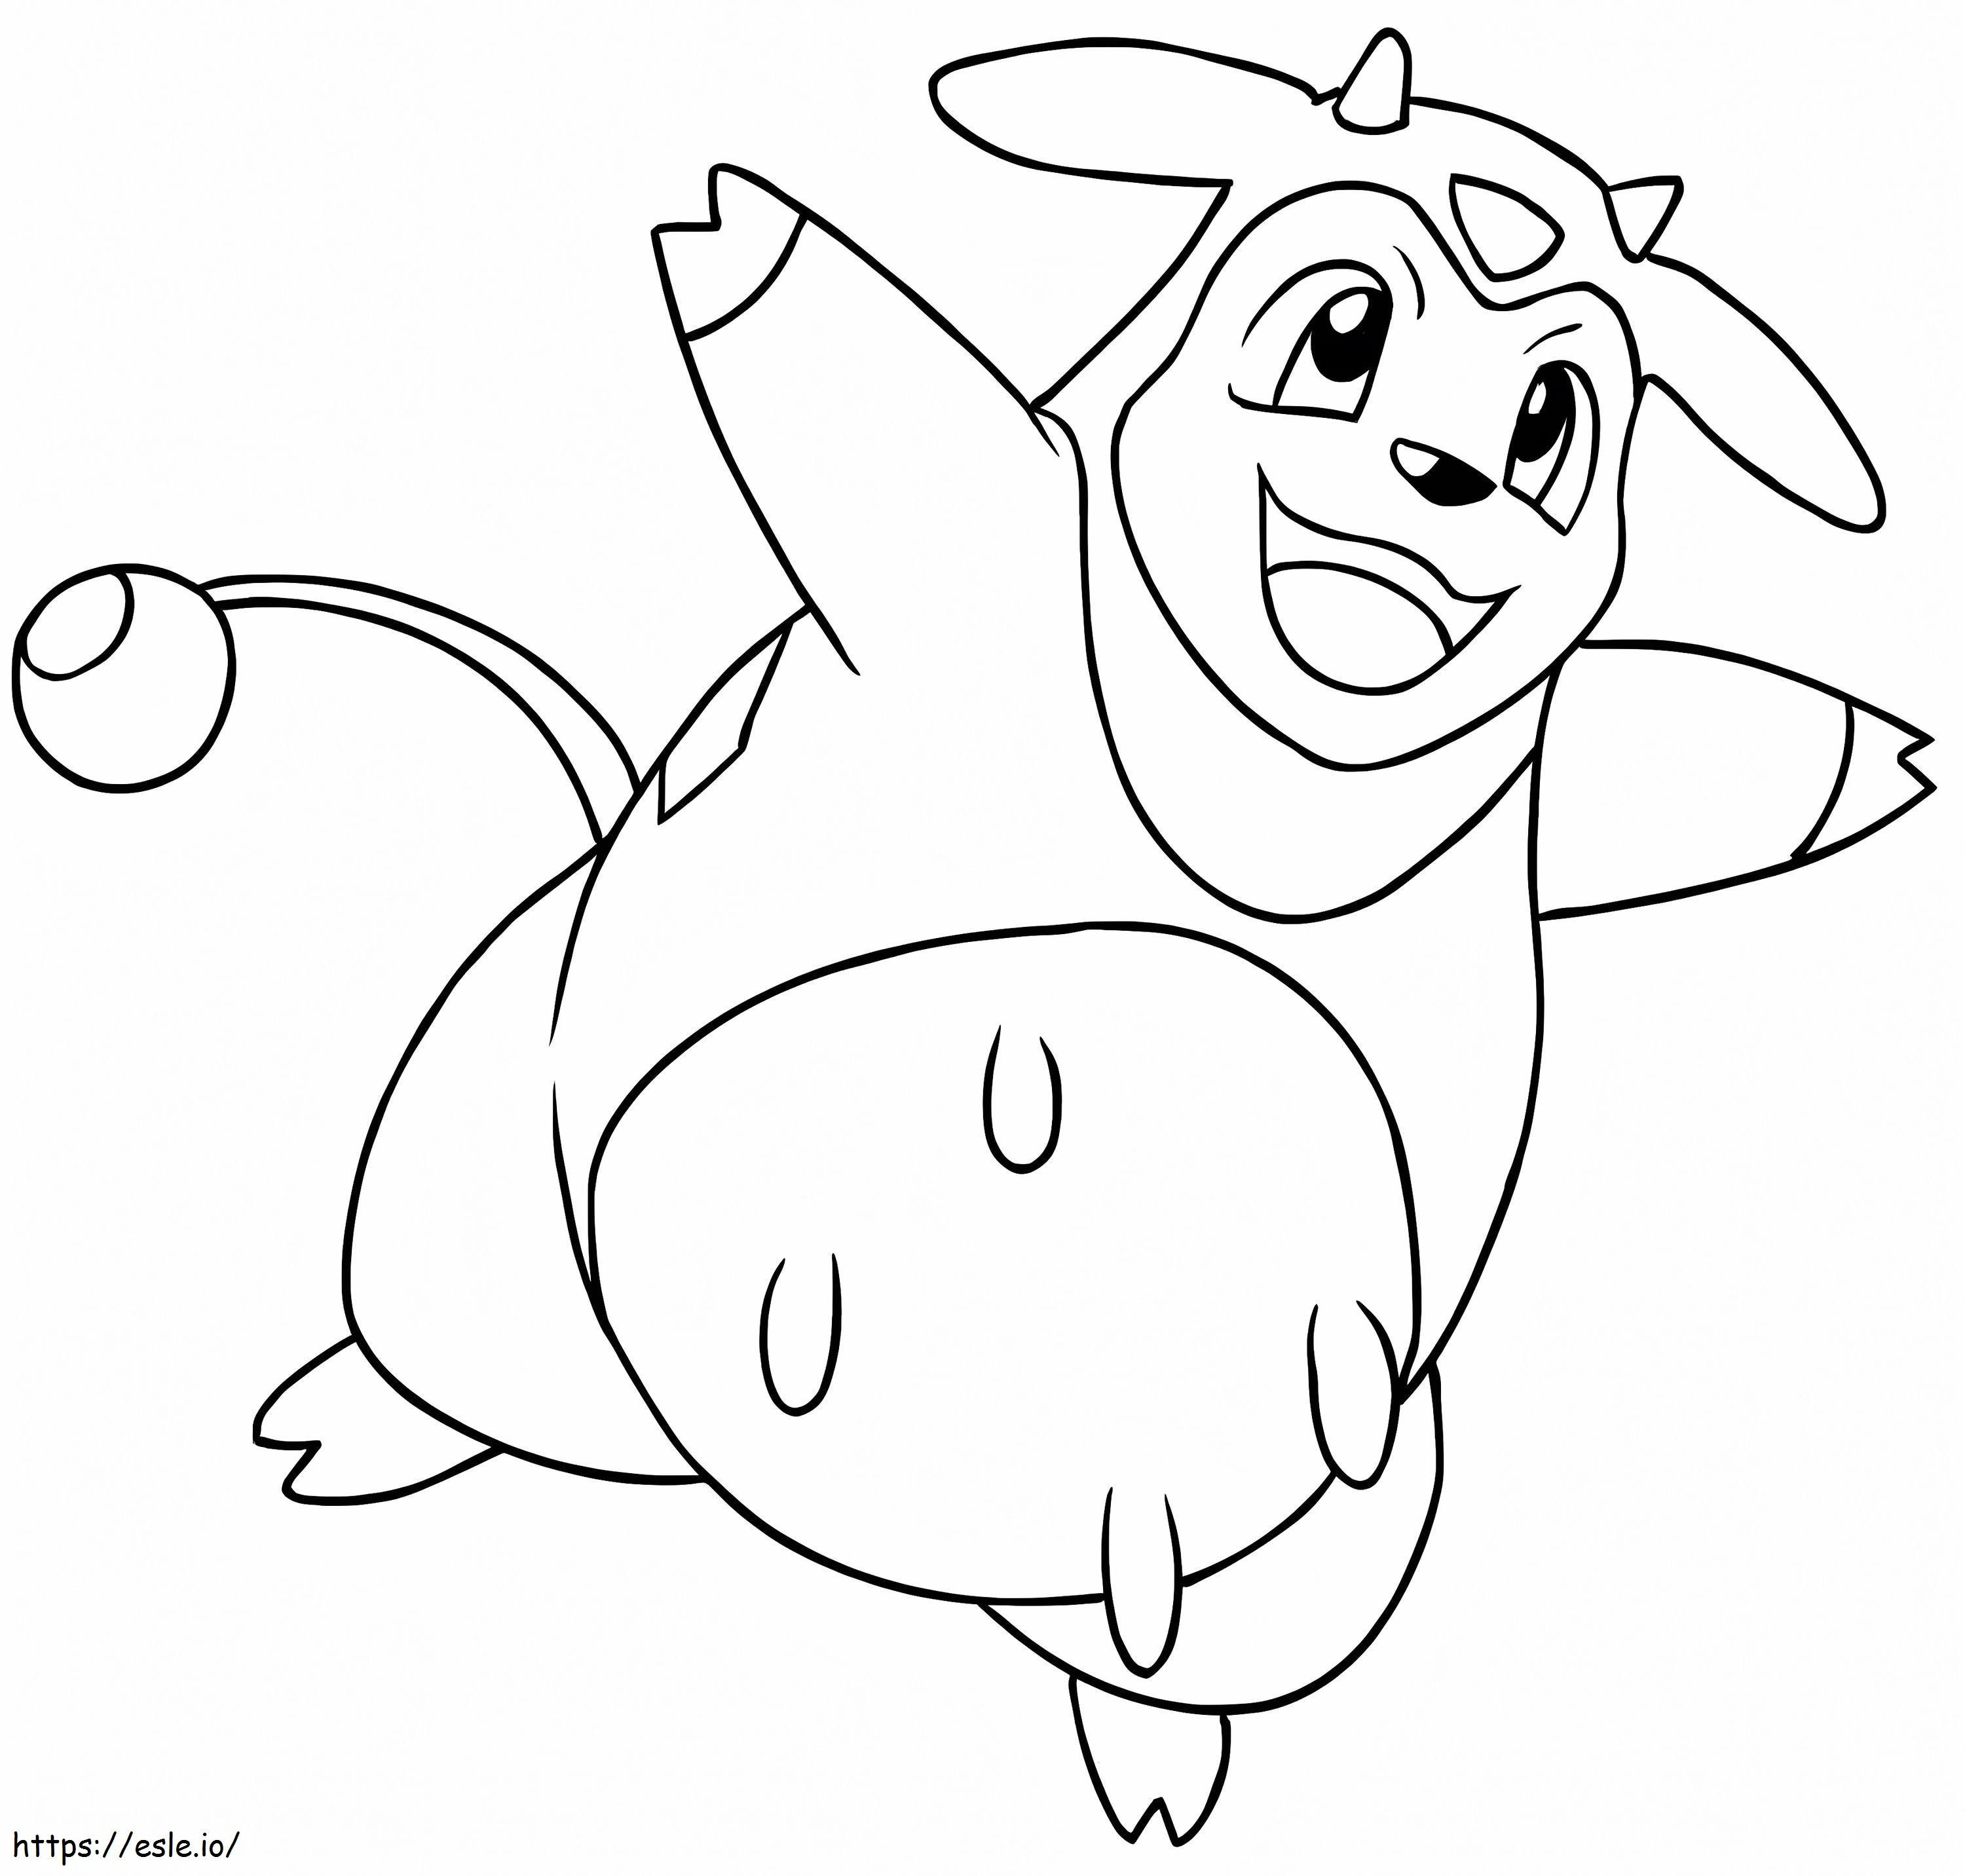 Miltank Not Pokemon coloring page